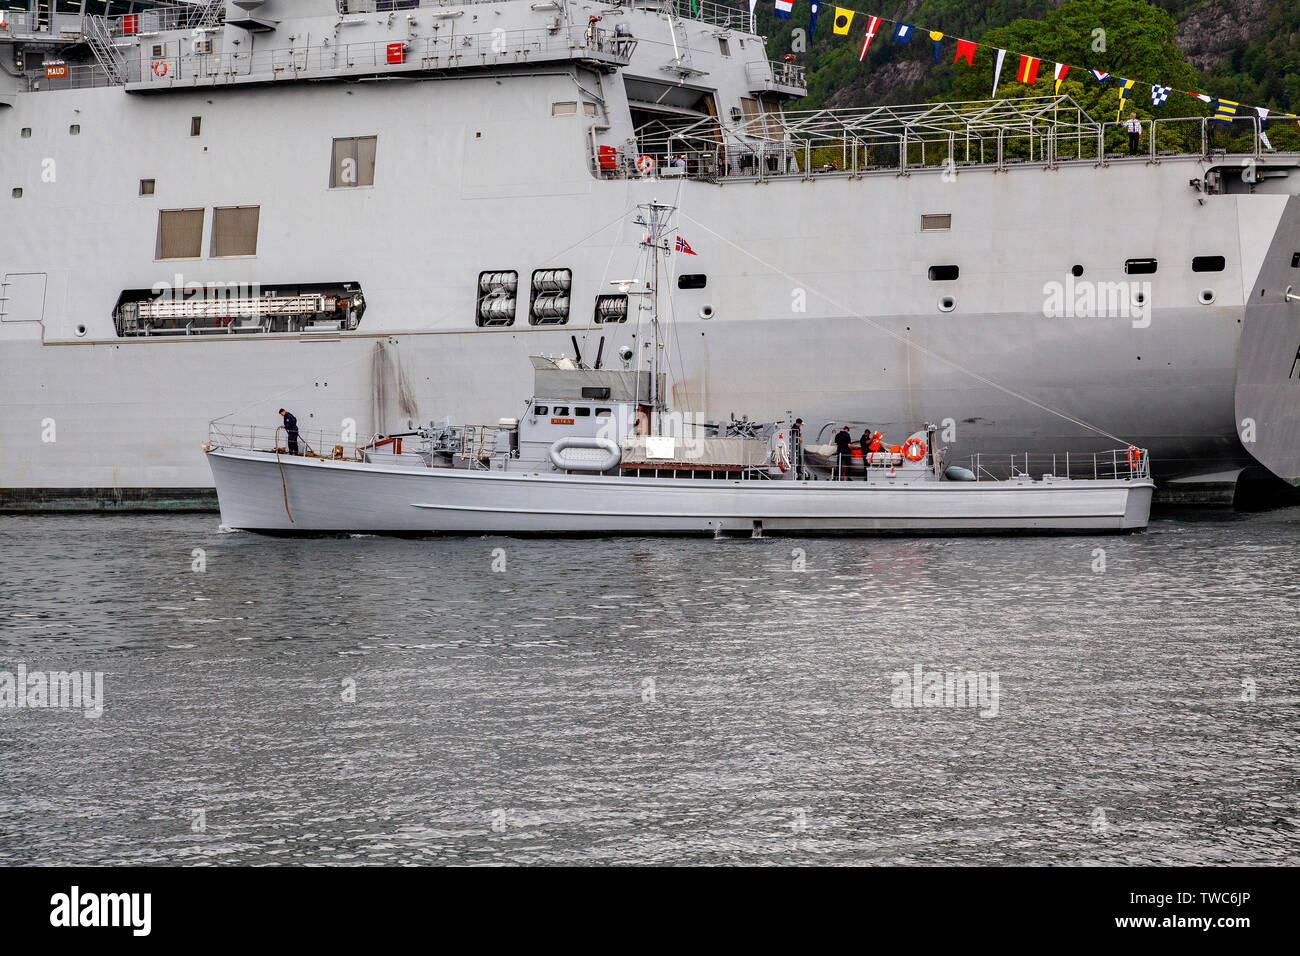 Veteran submarine chaser Hitra (built 1942) passing in front of navy replenishment vessel HNOMS Maud at Festningskaien quay, in the port of Bergen, No Stock Photo